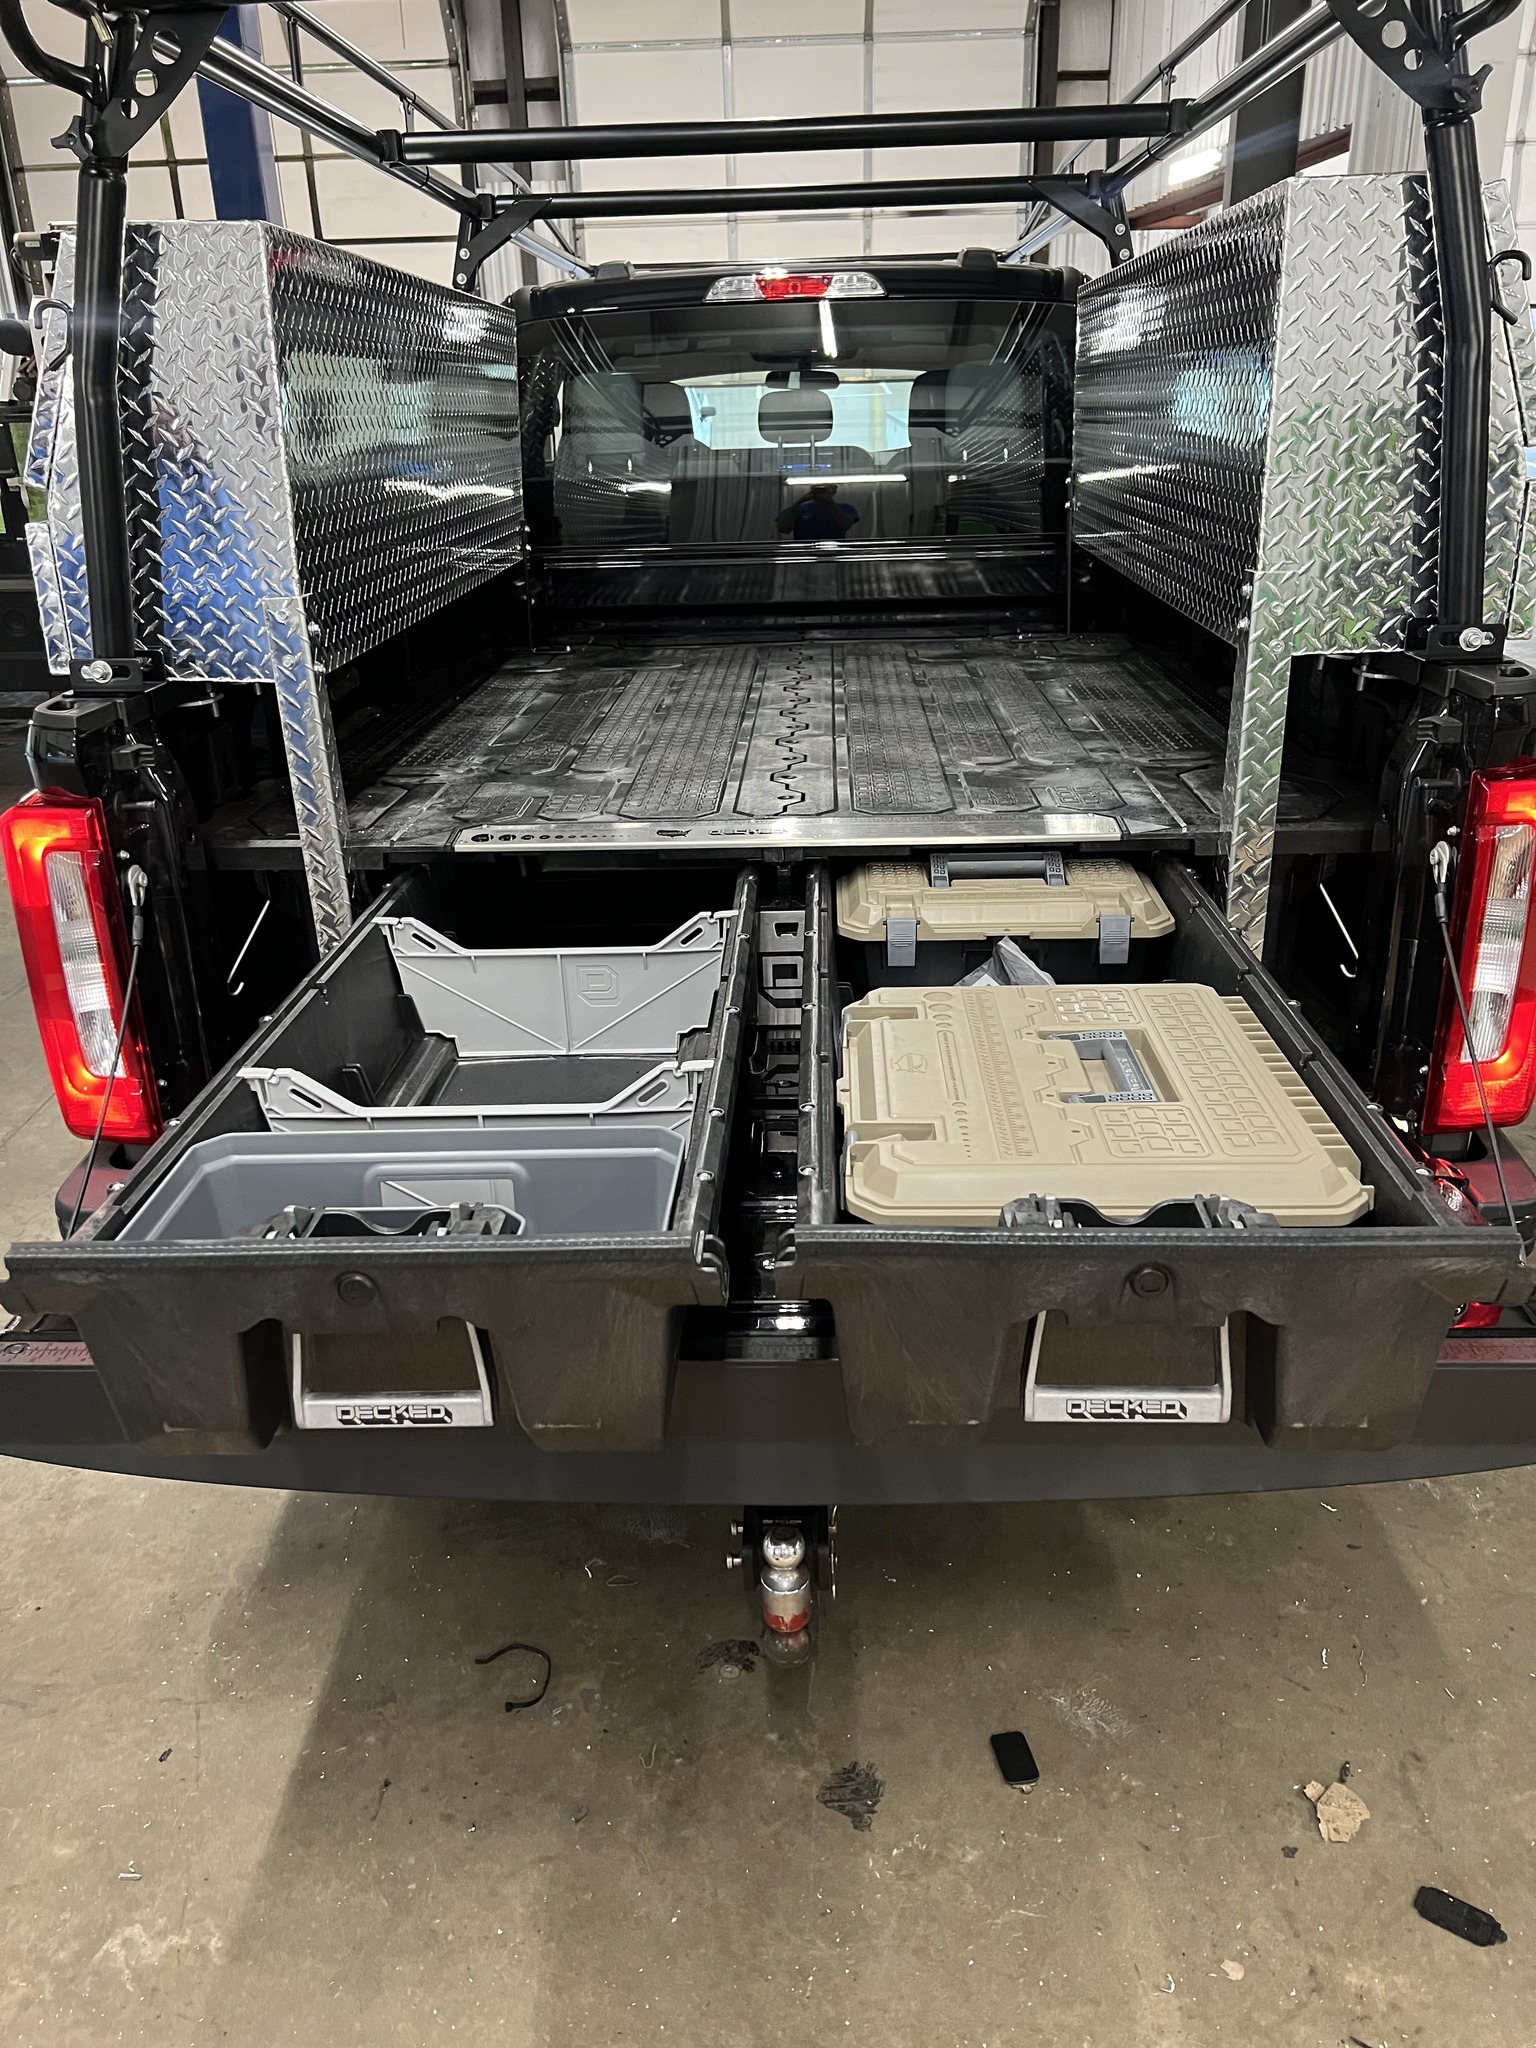 Work truck with utility bed that has pull out drawers under the bed